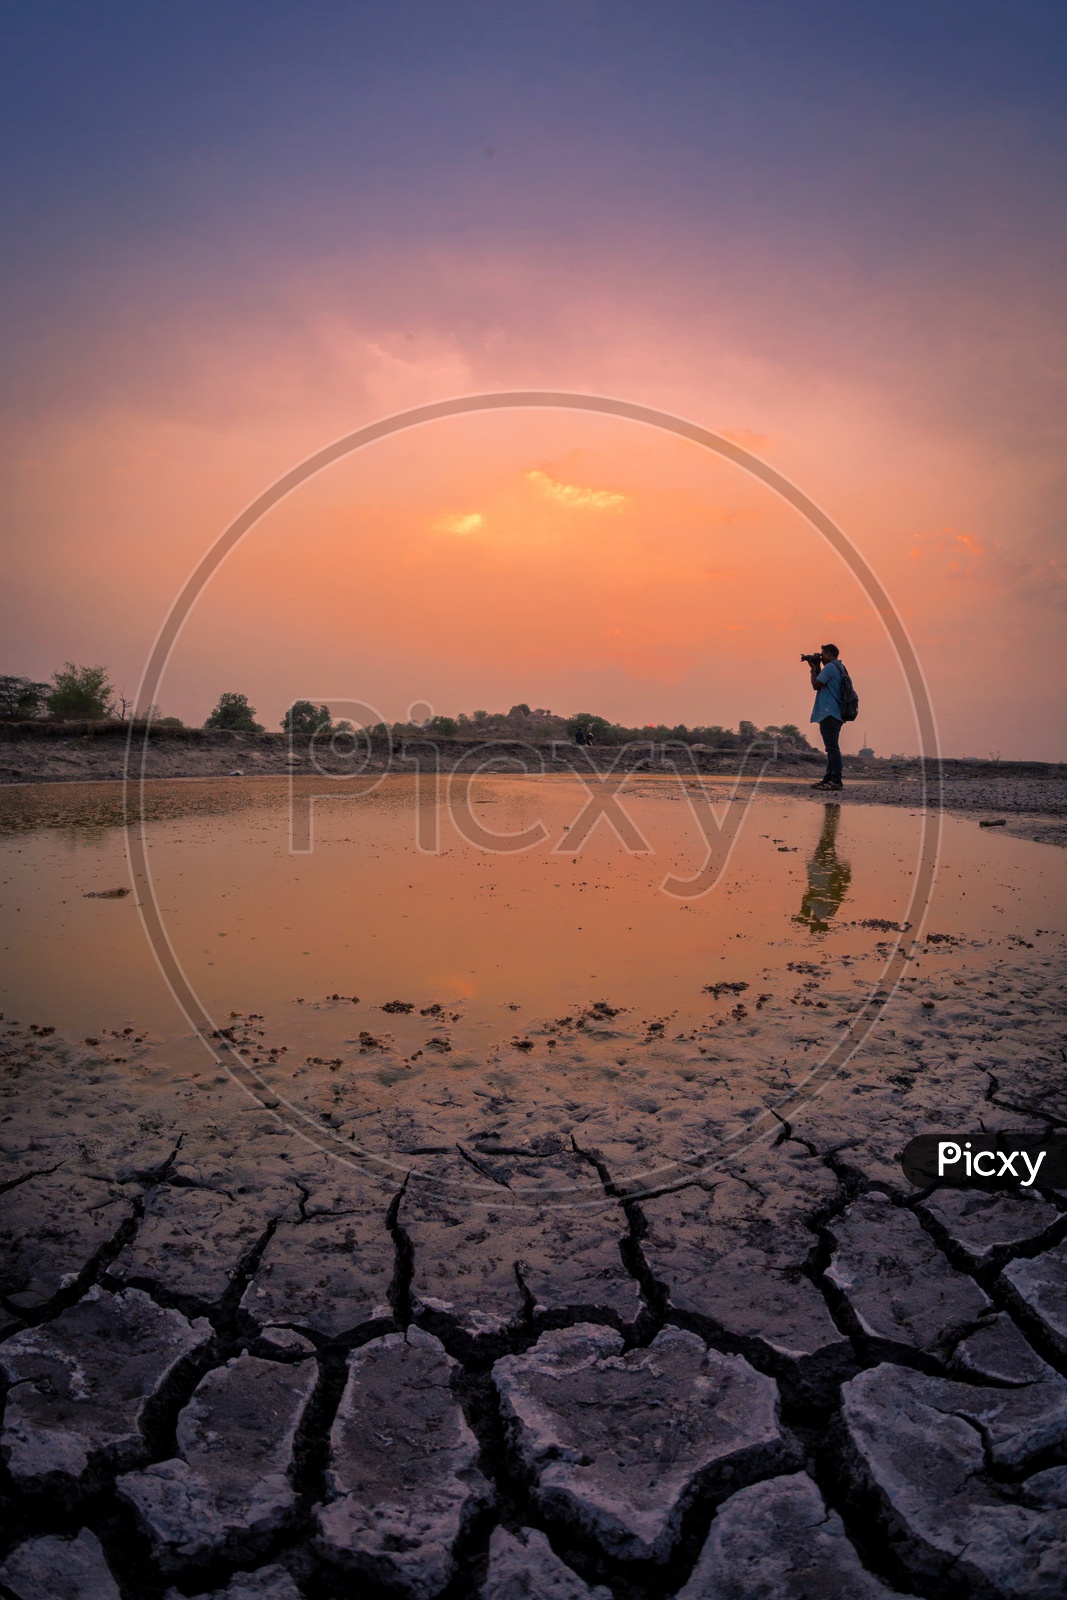 A Photographer And His Reflection On Water With a Sunset Sky In Background